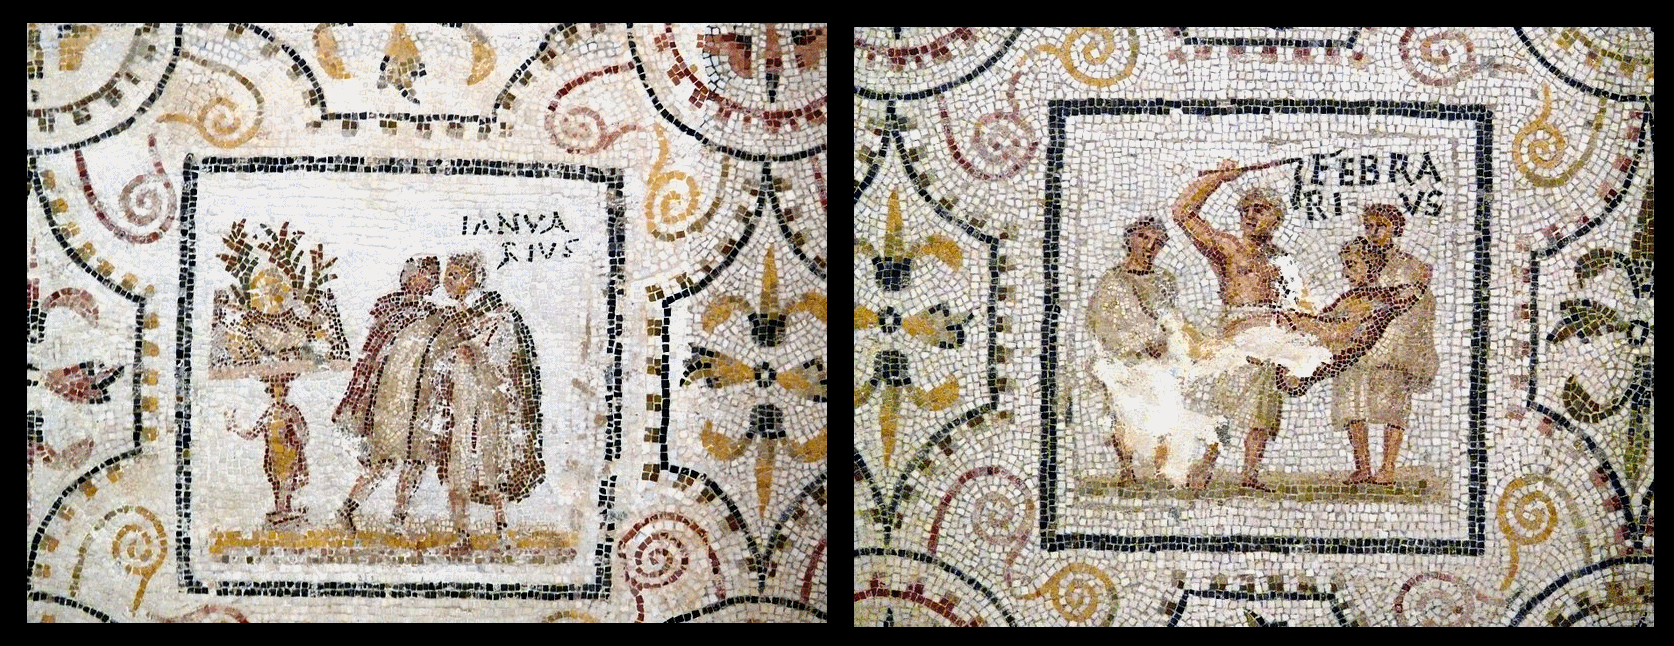 calendar-mosaic-archaeological-museum-of-sousse2.gif